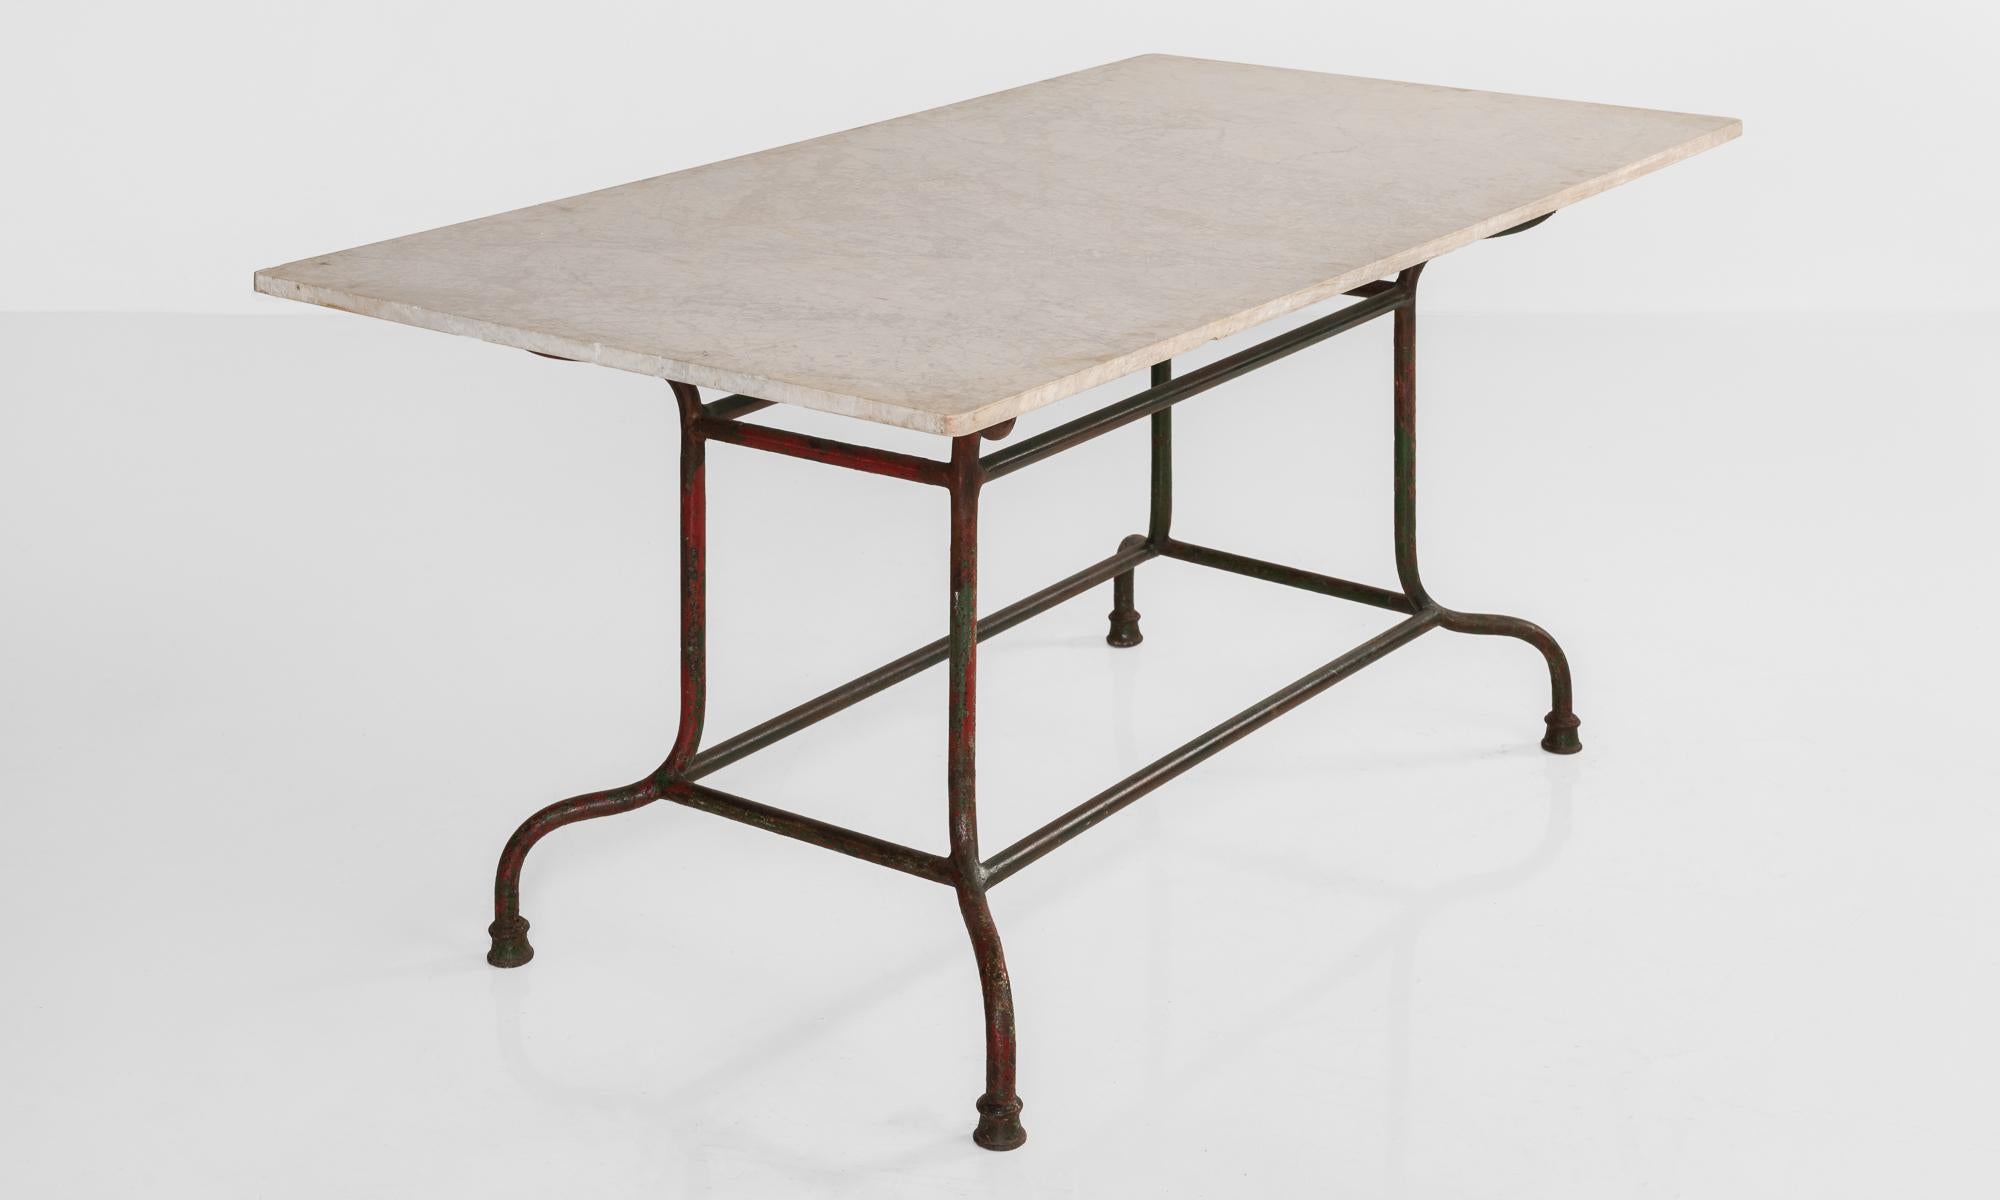 Painted Iron & Marble Table, France, circa 1920